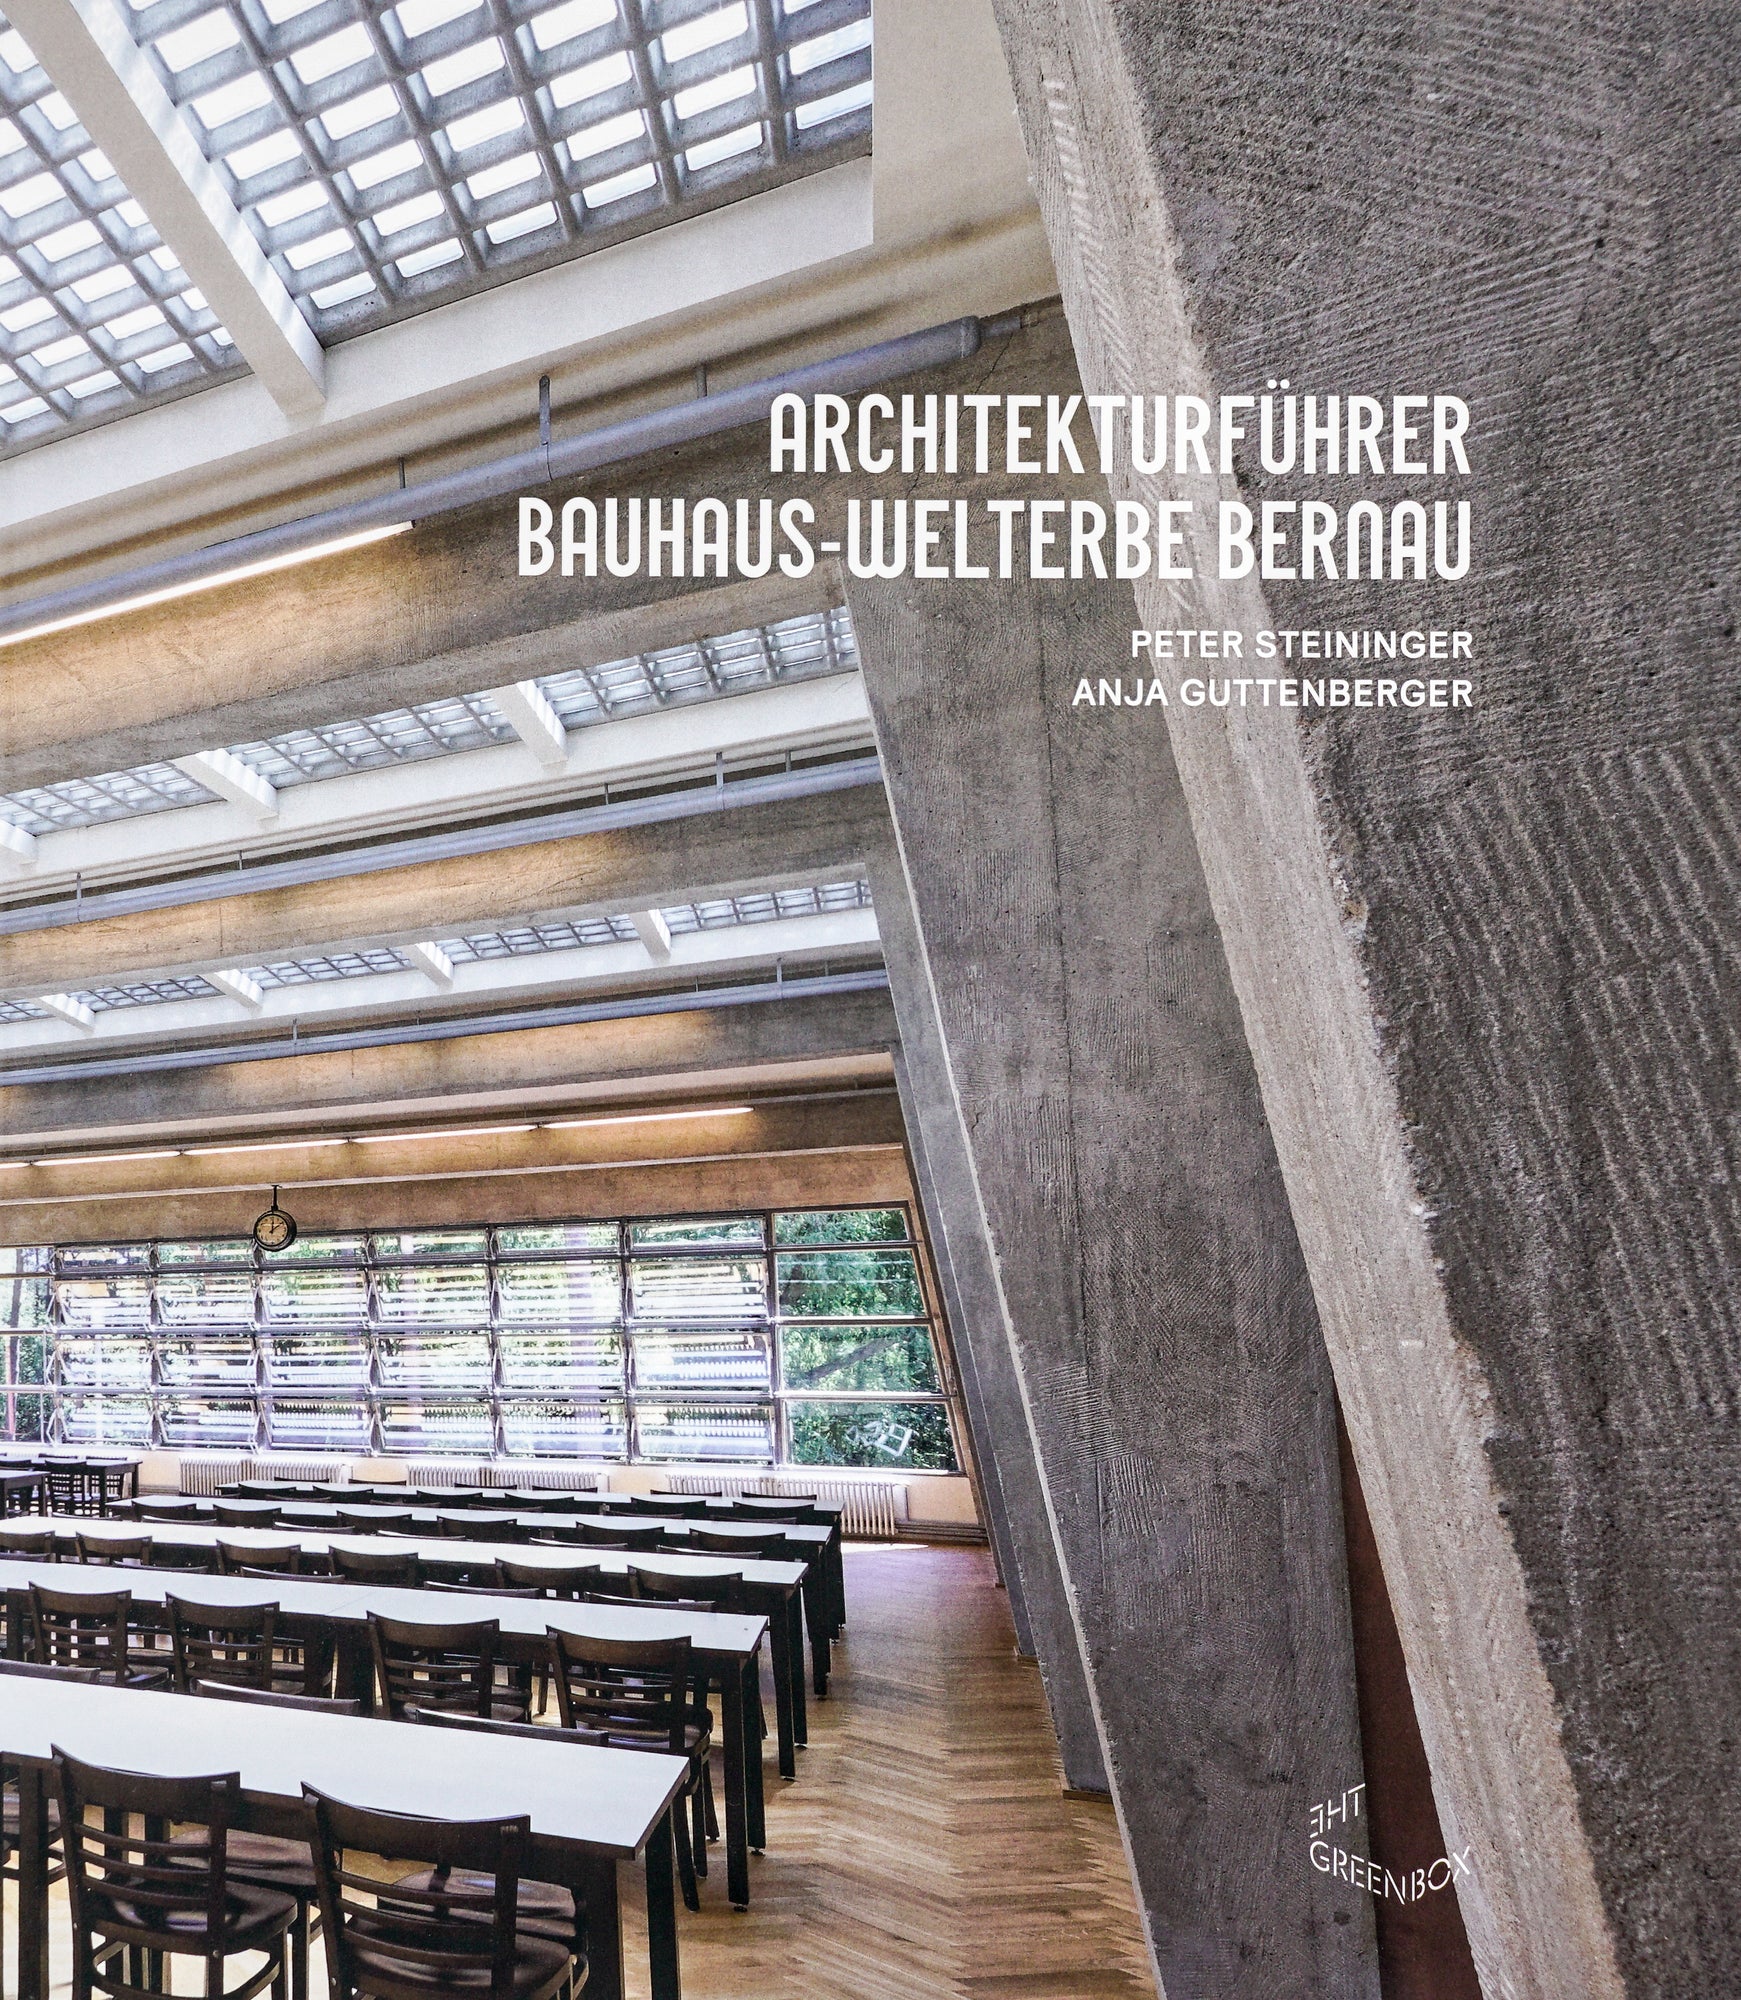 Book cover with a colour photography image of the inside of an architectural hall, depicting its beams, the ceiling and row of tables and chairs. The title Architekturführer. Bauhaus-Welterbe Bernau and the Editors is in white sans serif and the editors Peter Steininger and Anja Guttenberger below the title is as well in white sans serif writing.